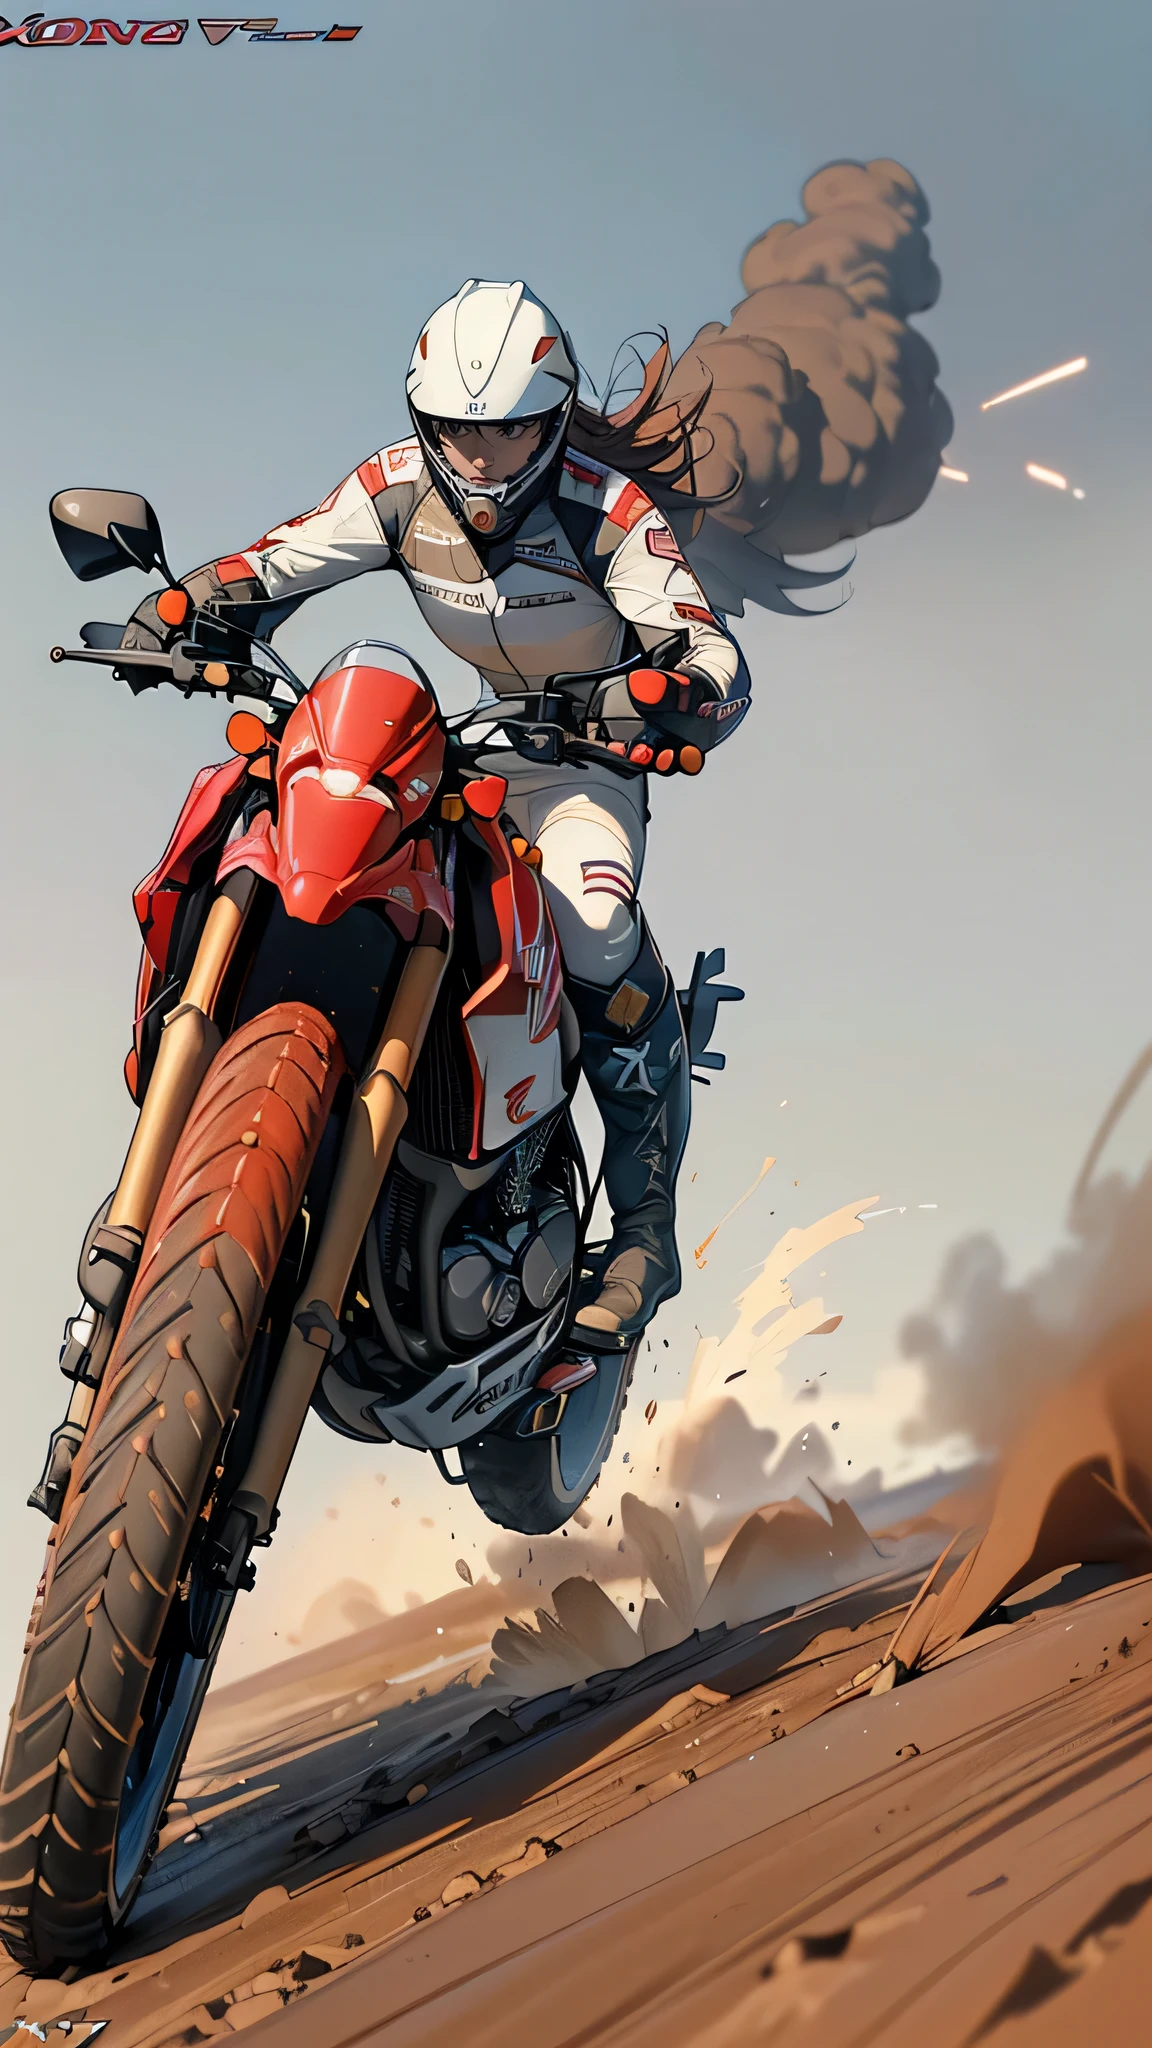 ((1 screen)), Dynamic Angle, (((No logo))), (((riding a large Off-road motorcycle made by the HONDA company XLV750R,red and white:1.8))), Midsummer afternoon, ((The Sunshine, hot,Sweat:1.3)), (((Military pattern high leg bikini:1.5))), break (Baja 1000 Race), (Altitude 3096m,Driving on dirt in Picacho del Diablo)), (((Firmly grasp the left and right handle grips))), break (highest quality,4K,8k,High resolution,masterpiece:1.2),Super detailed,(Realistic,photoRealistic,photo-Realistic:1.37), (perfect anatomy), (Perfect ratio of fingers to thumb), (Symmetrical face), break (Beautiful young woman rider(Simple Helmet, Gloves,boots:1.5)), break (8 heads,Beautiful body line), (Medium breast,Beautiful valley), (Flat stomach), (Small waist), (Beautiful big ass), break ((Expressing a sense of speed:1.5)), ((Expressing the feeling of sprinting)), (((Sprint,walking fast,Explosive,Pleasure))), (Driving on dirt) (((Flying sand and intense dust))), break (((A smile comes to mind))), (((I&#39;m so happy I can&#39;t help but laugh))), (((Here we go!!How about it!!))) break ((HONDA XLV750R: Car height,High seat height,Big body)) break